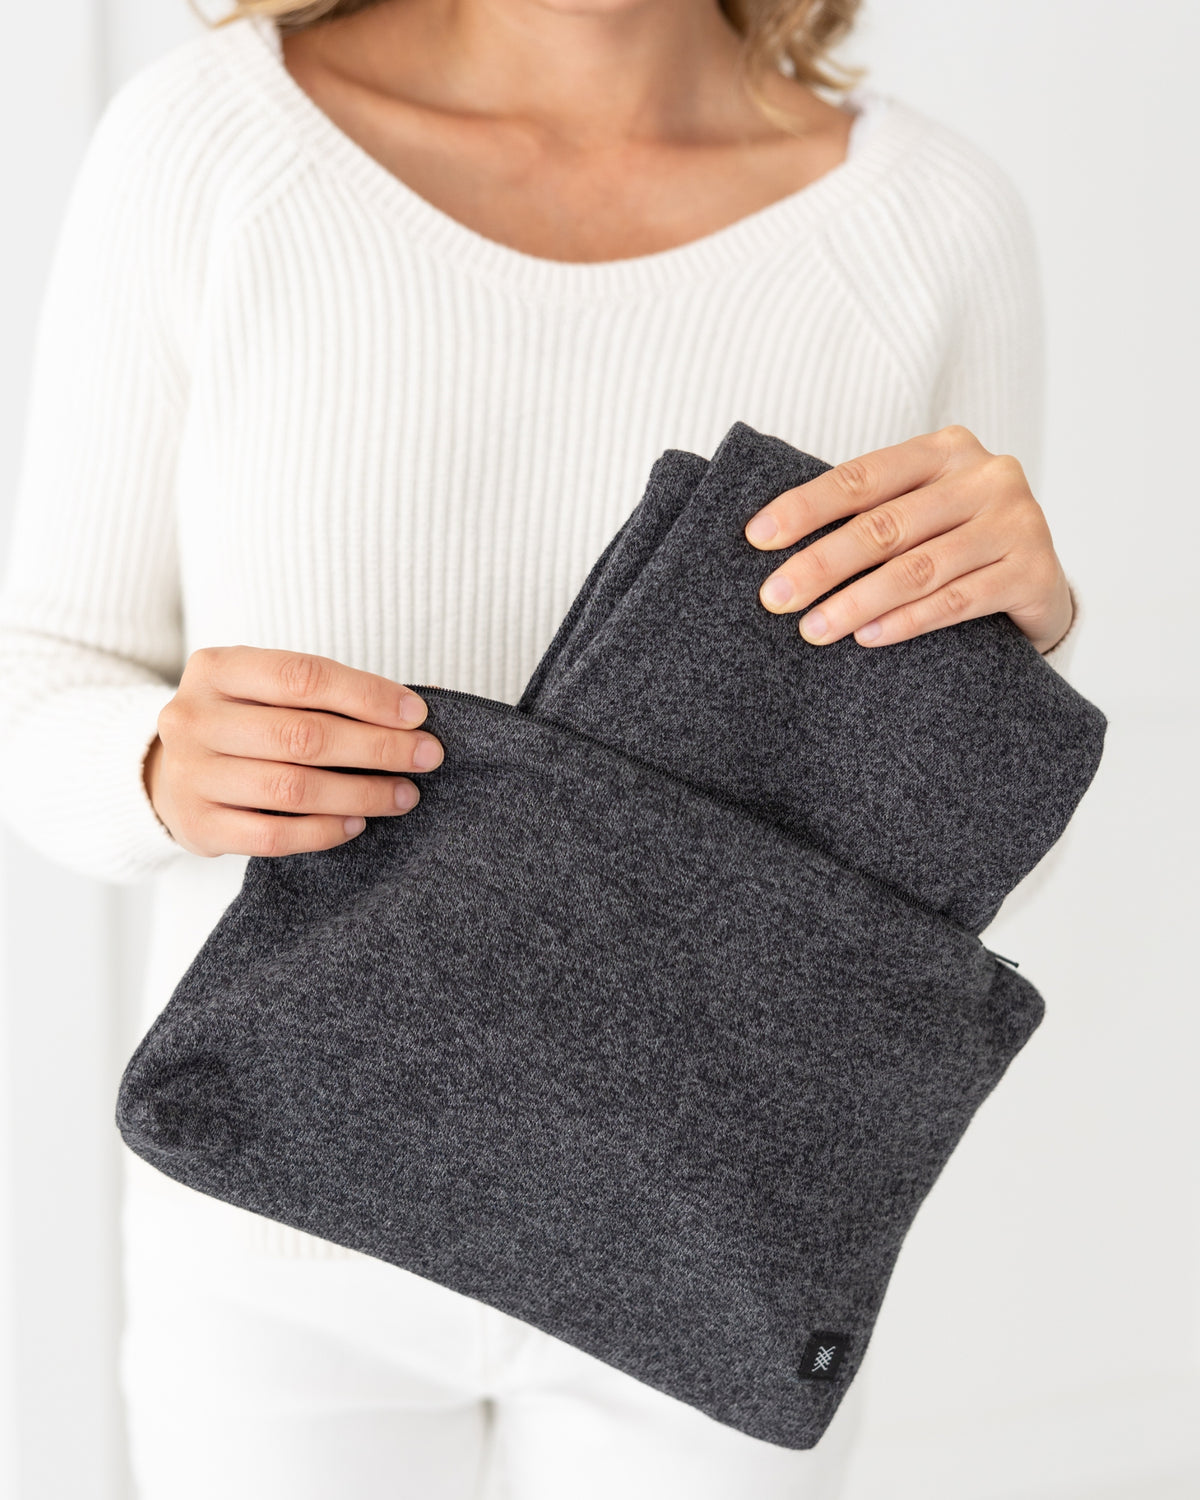 Woman holding Graphite Carry Pouch, which is a gray zipper pouch that can hold the Dreamsoft Travel Scarf. Graphite Dreamsoft Travel Scarf being shown taken out of the carry pouch.